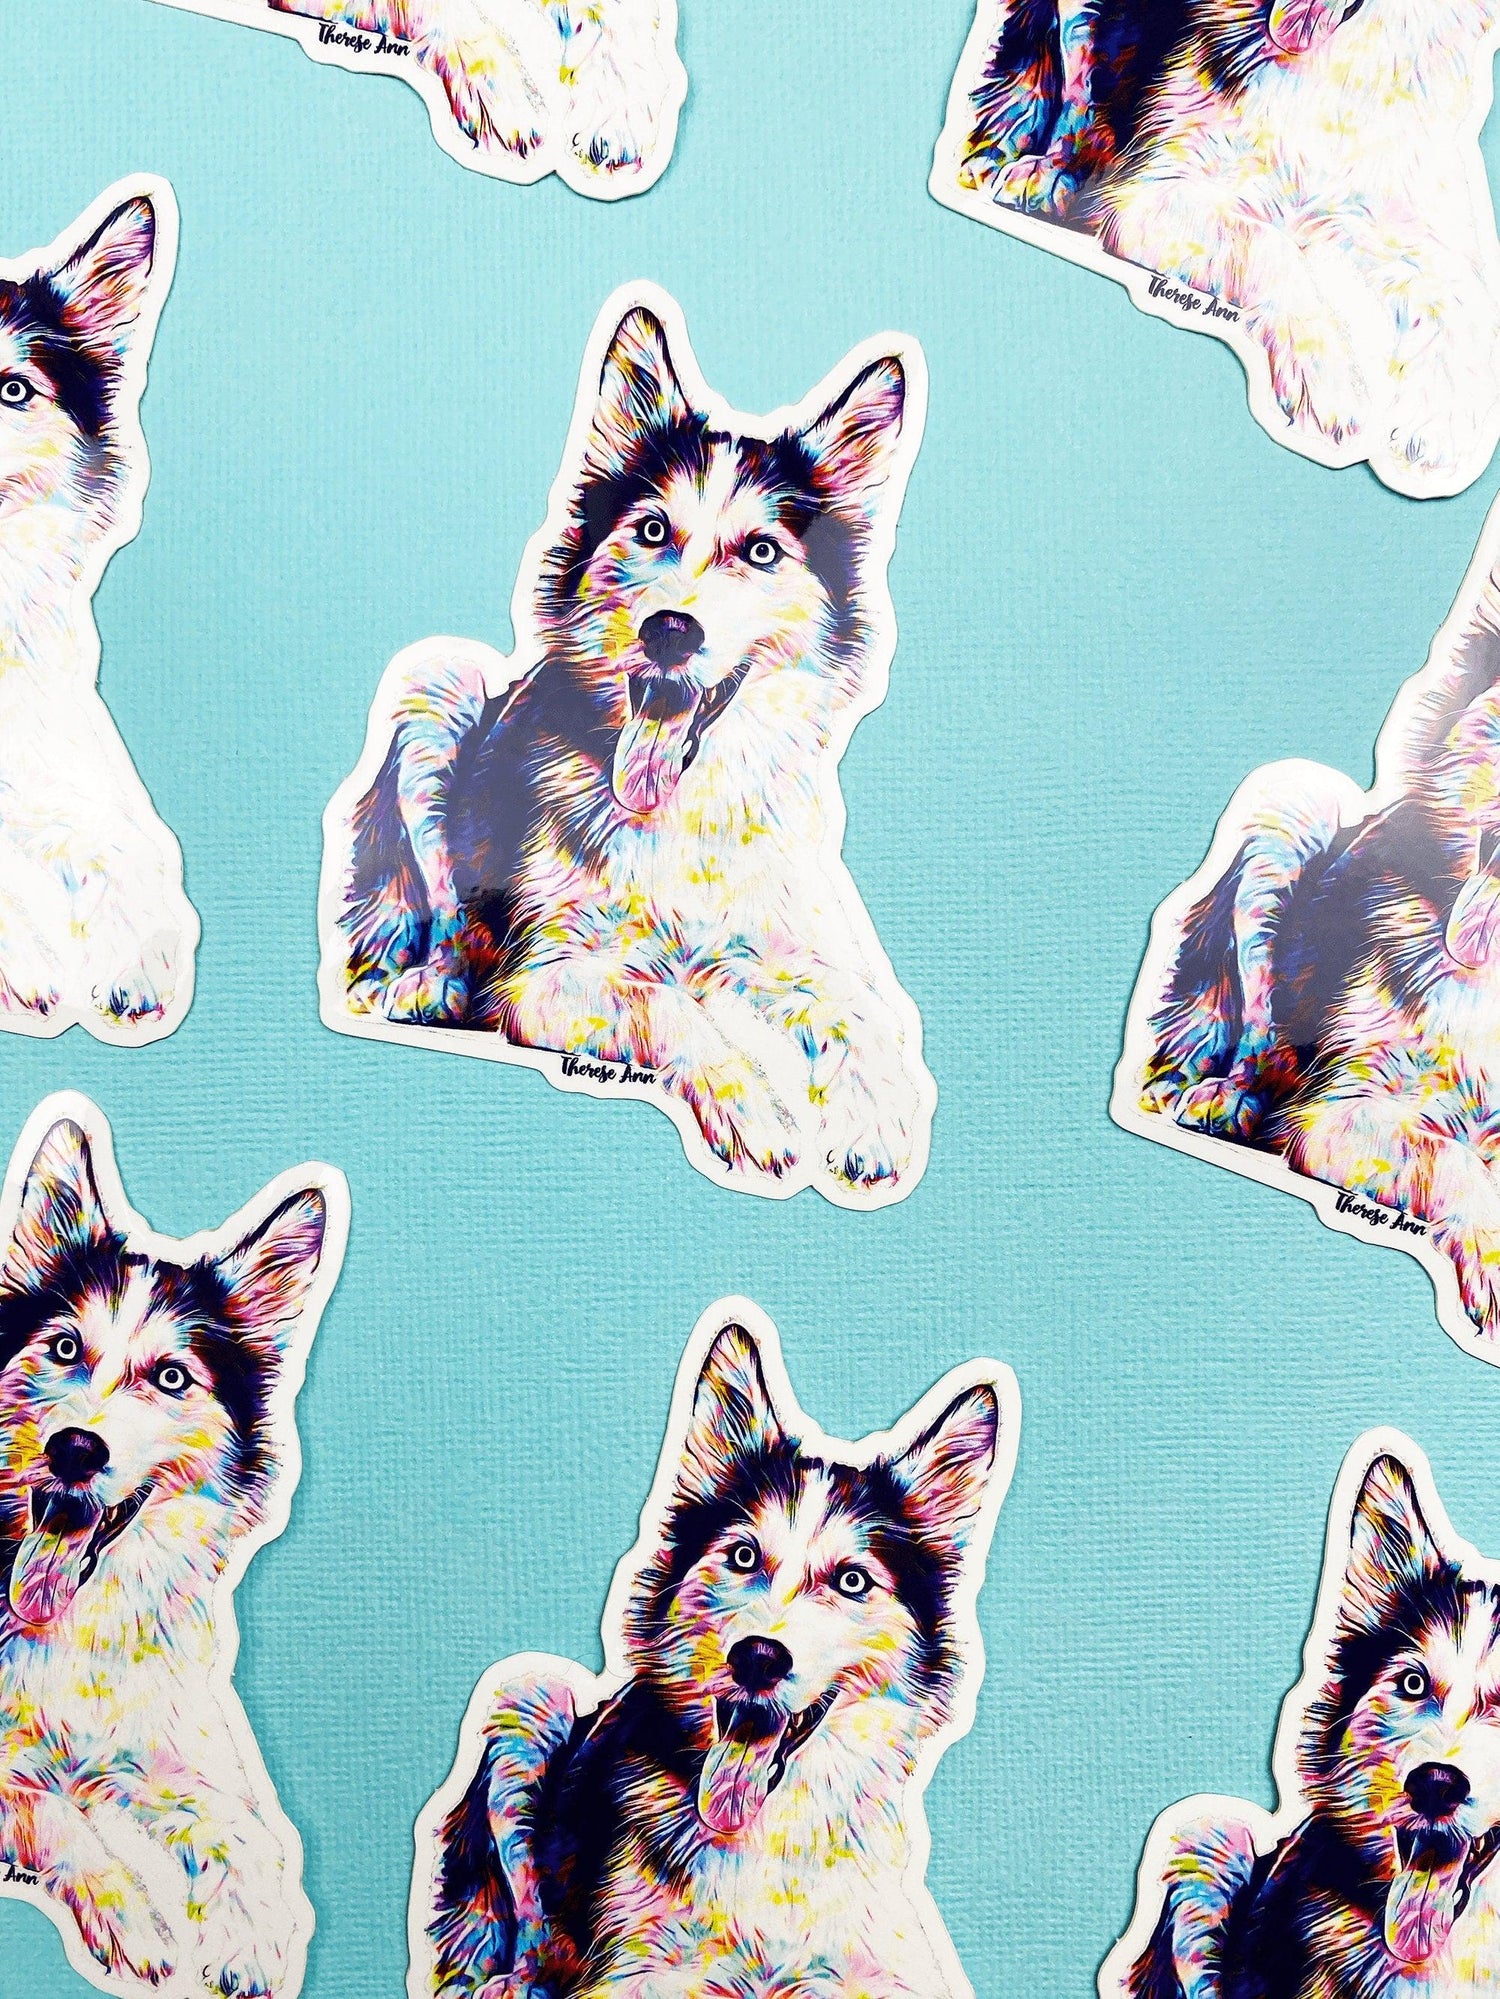 Husky Sticker Colorful Abstract Cute Husky Dog Decal for Car